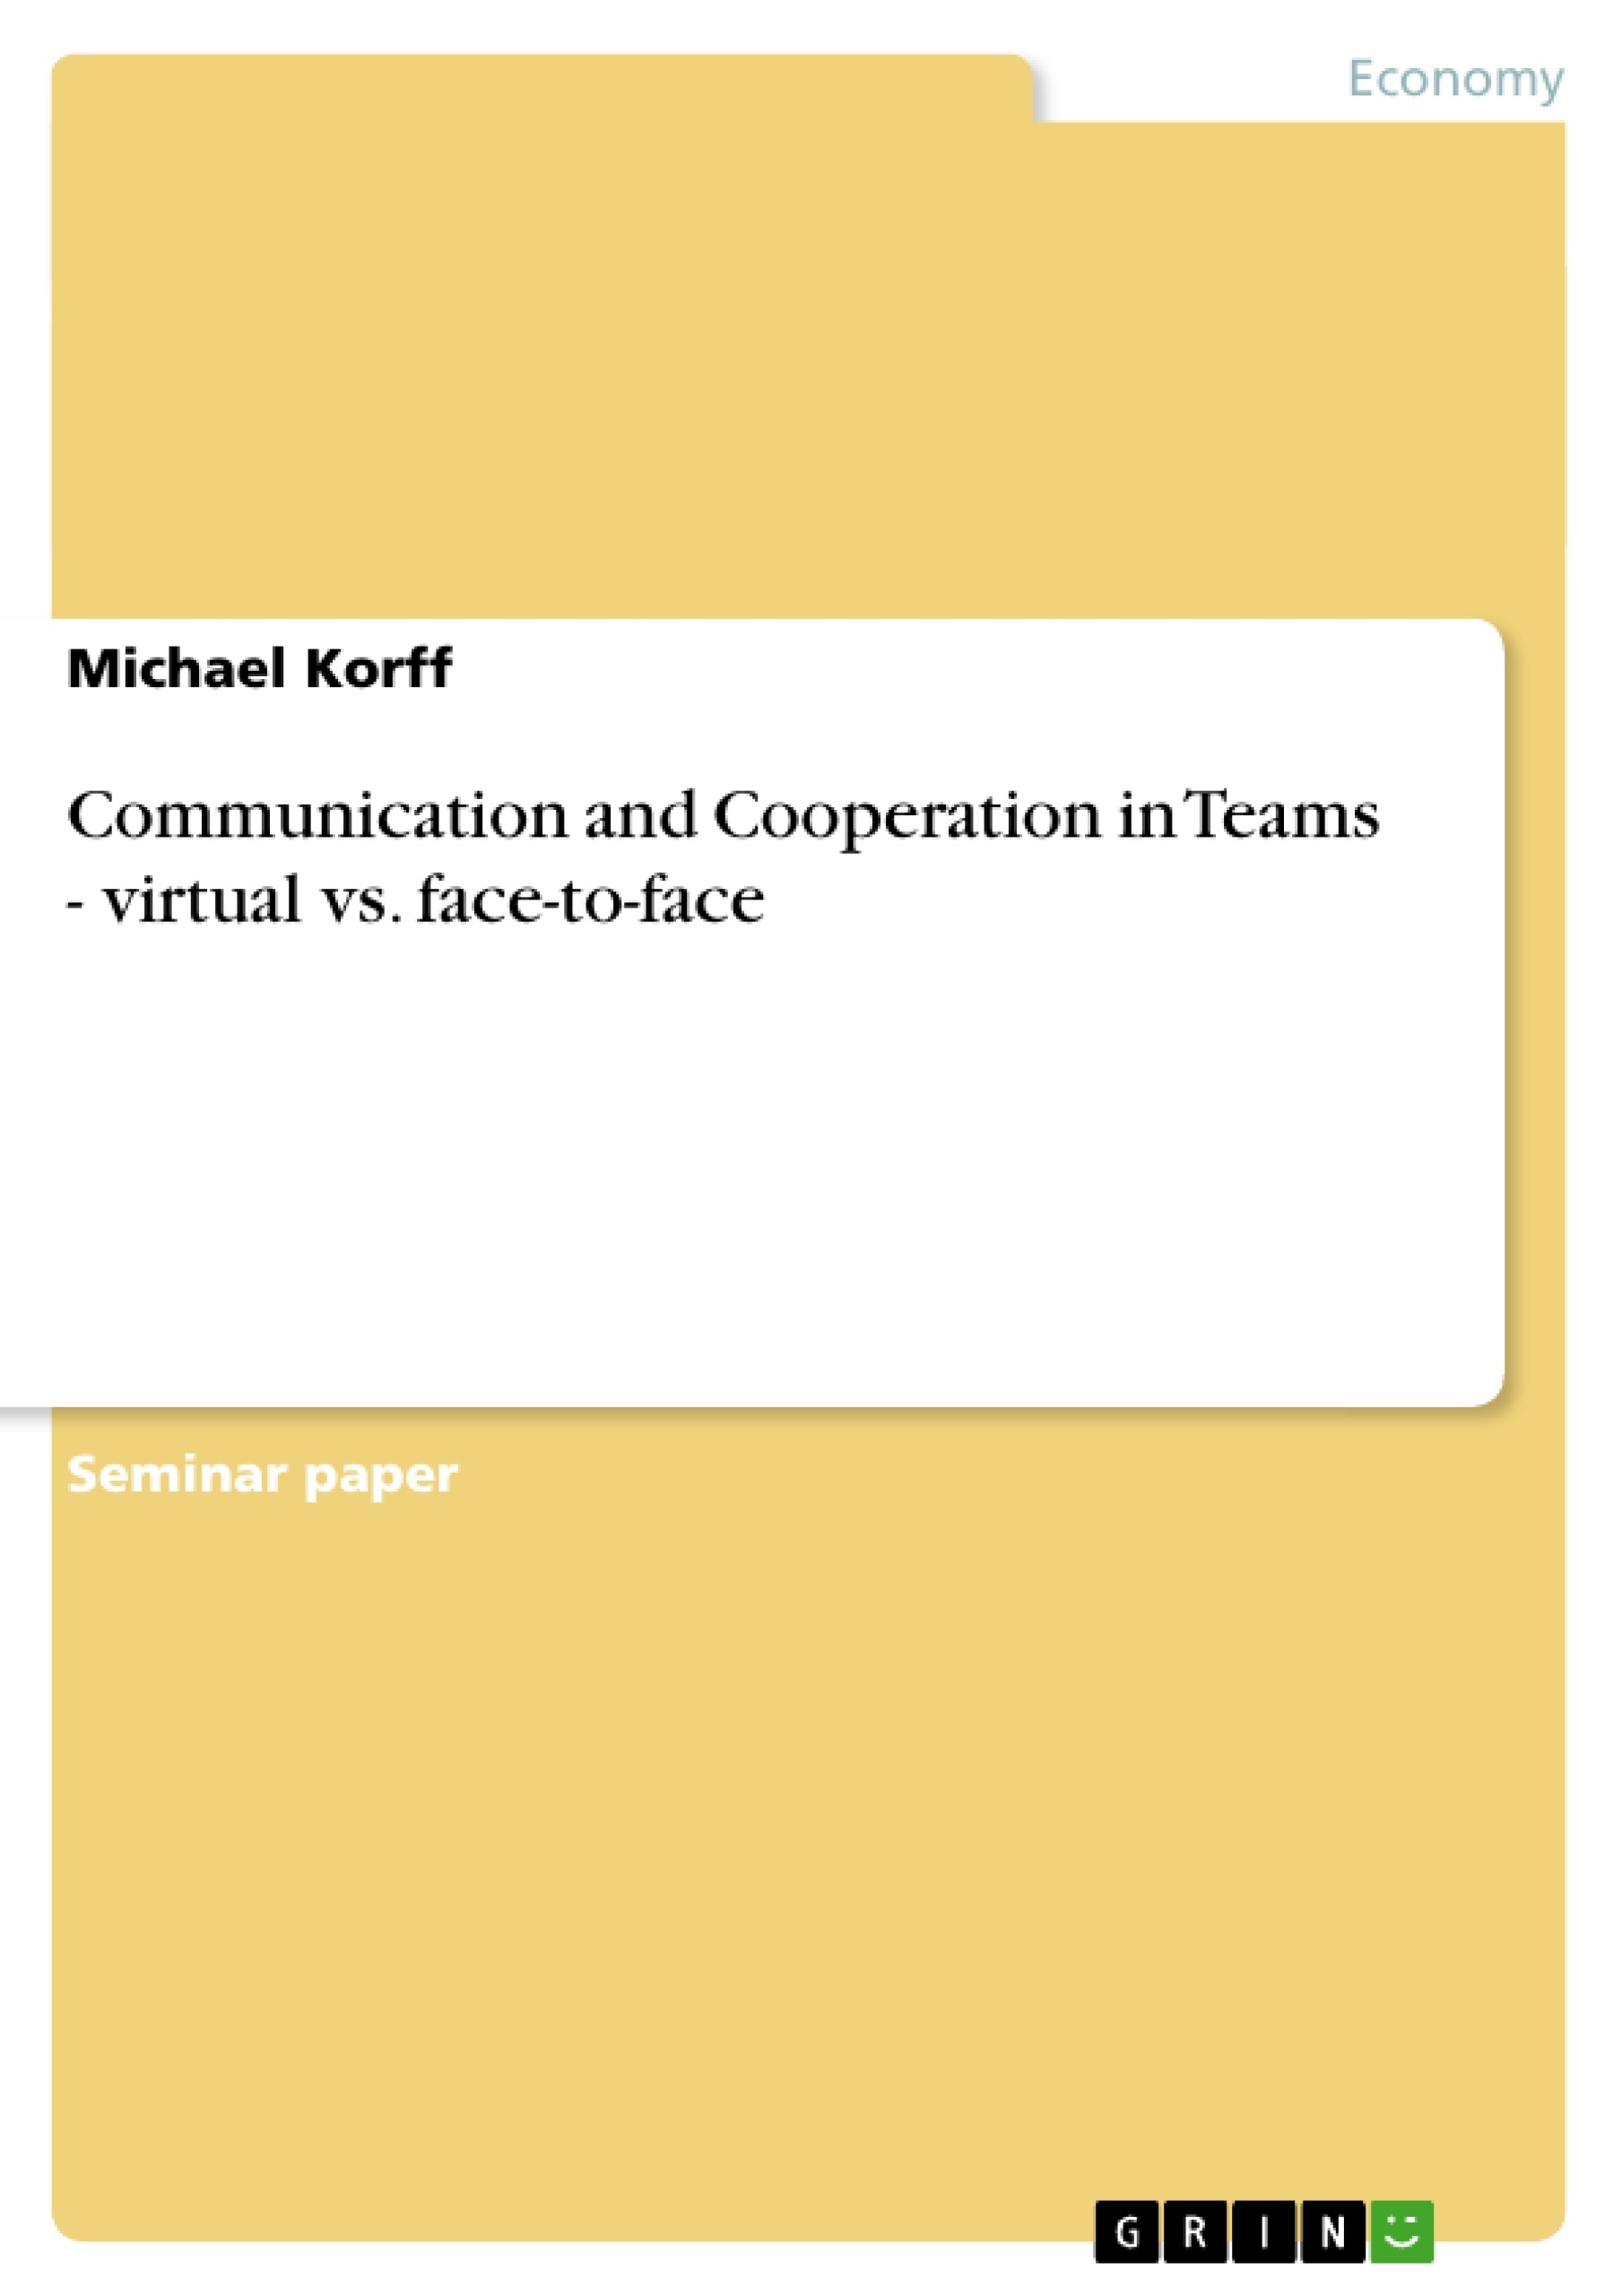 Title: Communication and Cooperation in Teams -  virtual vs. face-to-face